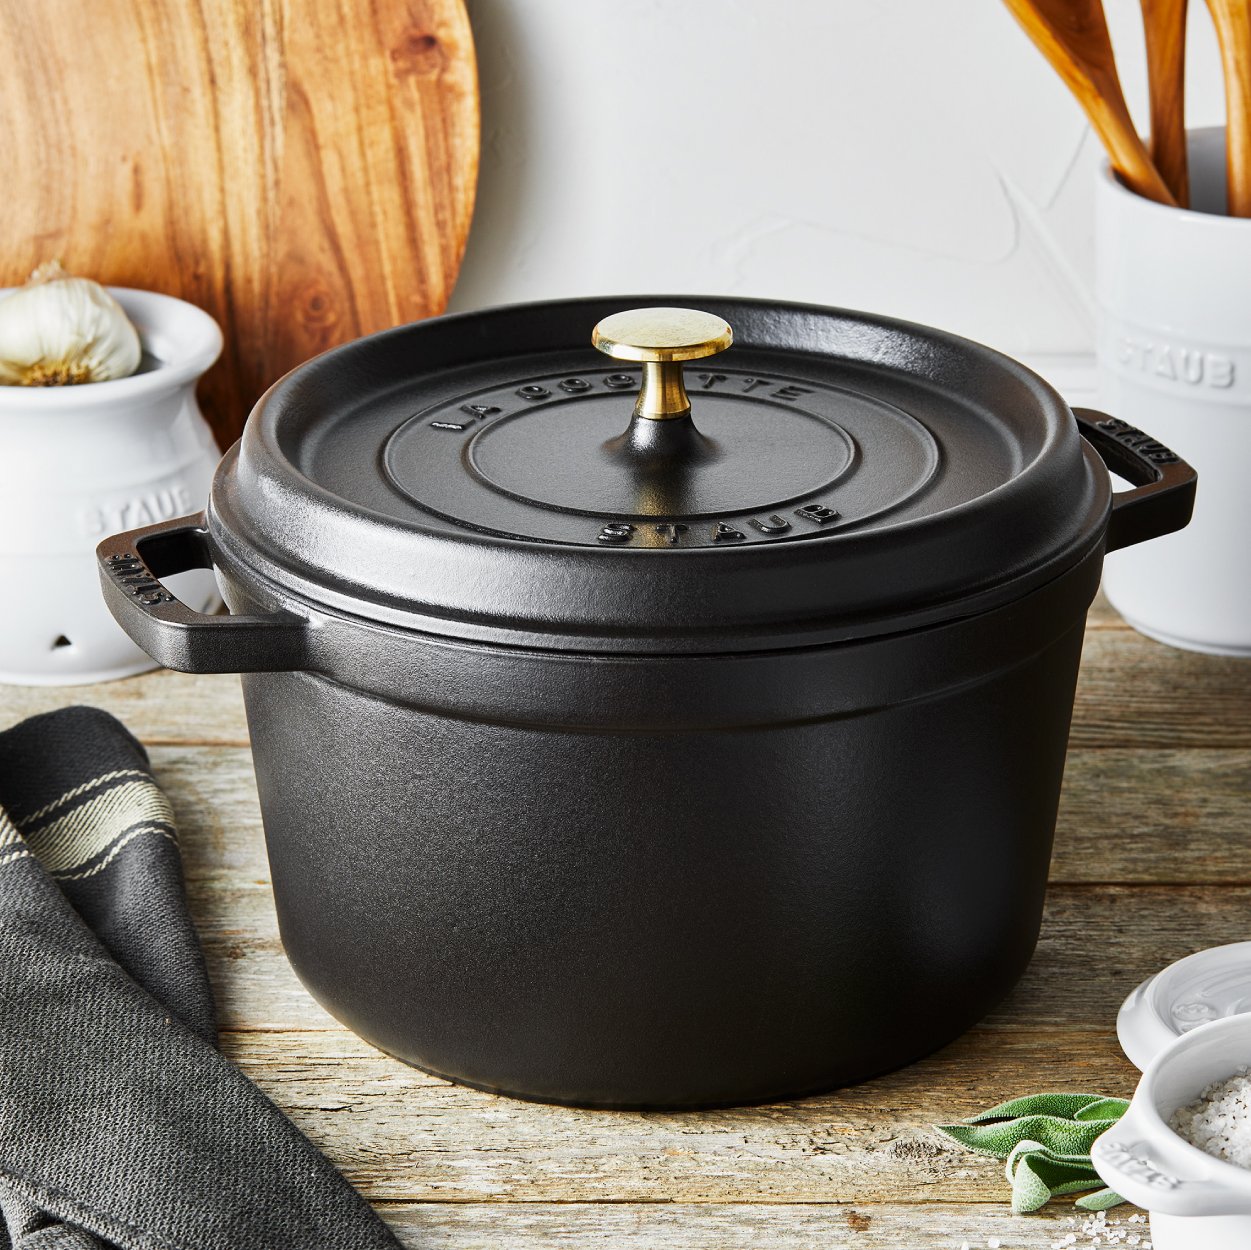 https://www.zwilling.com/on/demandware.static/-/Sites-zwilling-us-Library/default/dwc0eccceb/images/product-content/masonry-content/staub/cast-iron/cocotte/TallCocottes_Mason_Comp_600-600_TallCocotte_1.jpg